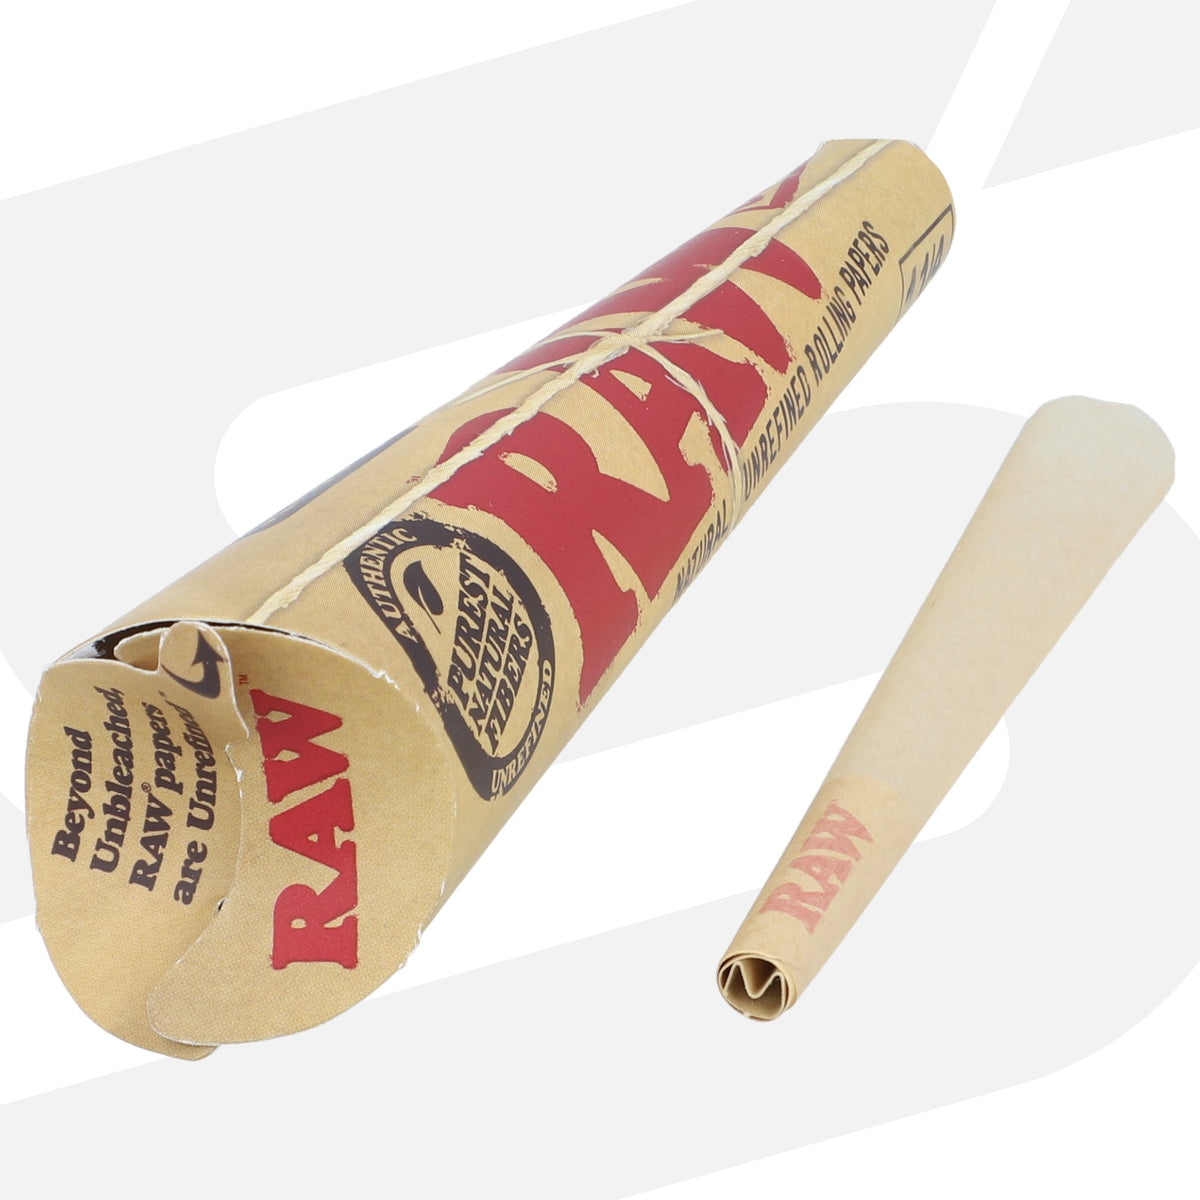 RAW Classic 1 1/4 Cones - 6 Pack RAW Cones WAR00603-1/32 esd-official